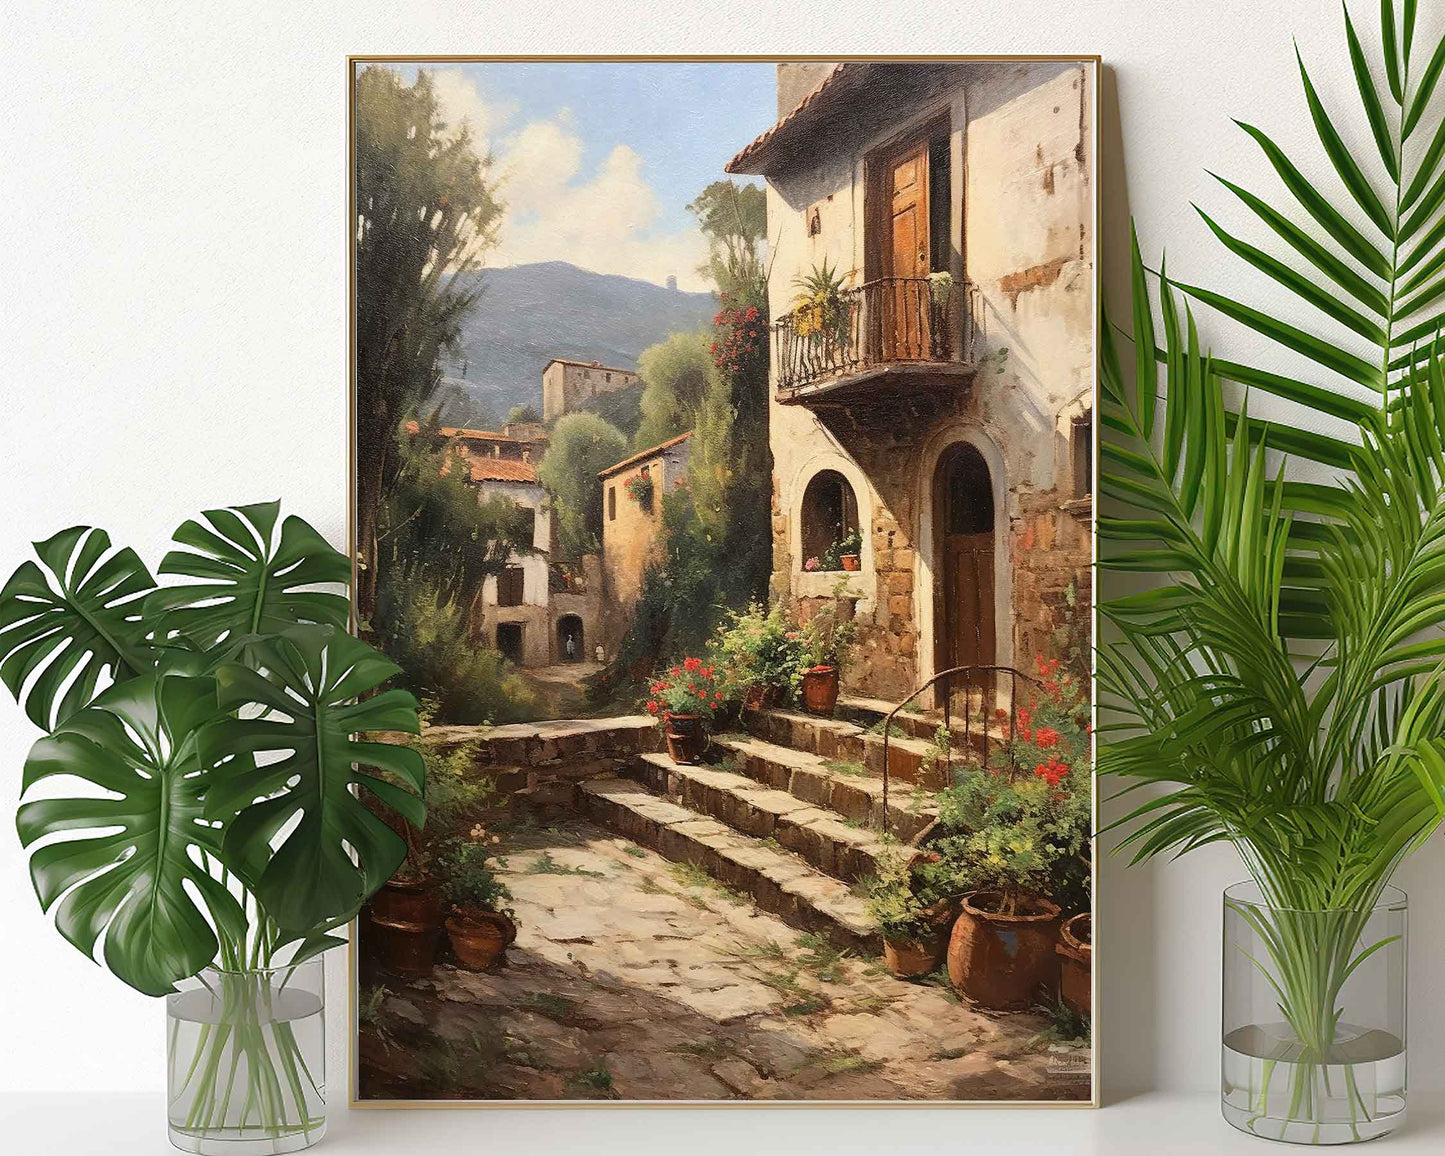 Framed Image of Italian Scenic Lifestyle Travel & Landscapes of Italy Wall Art Prints